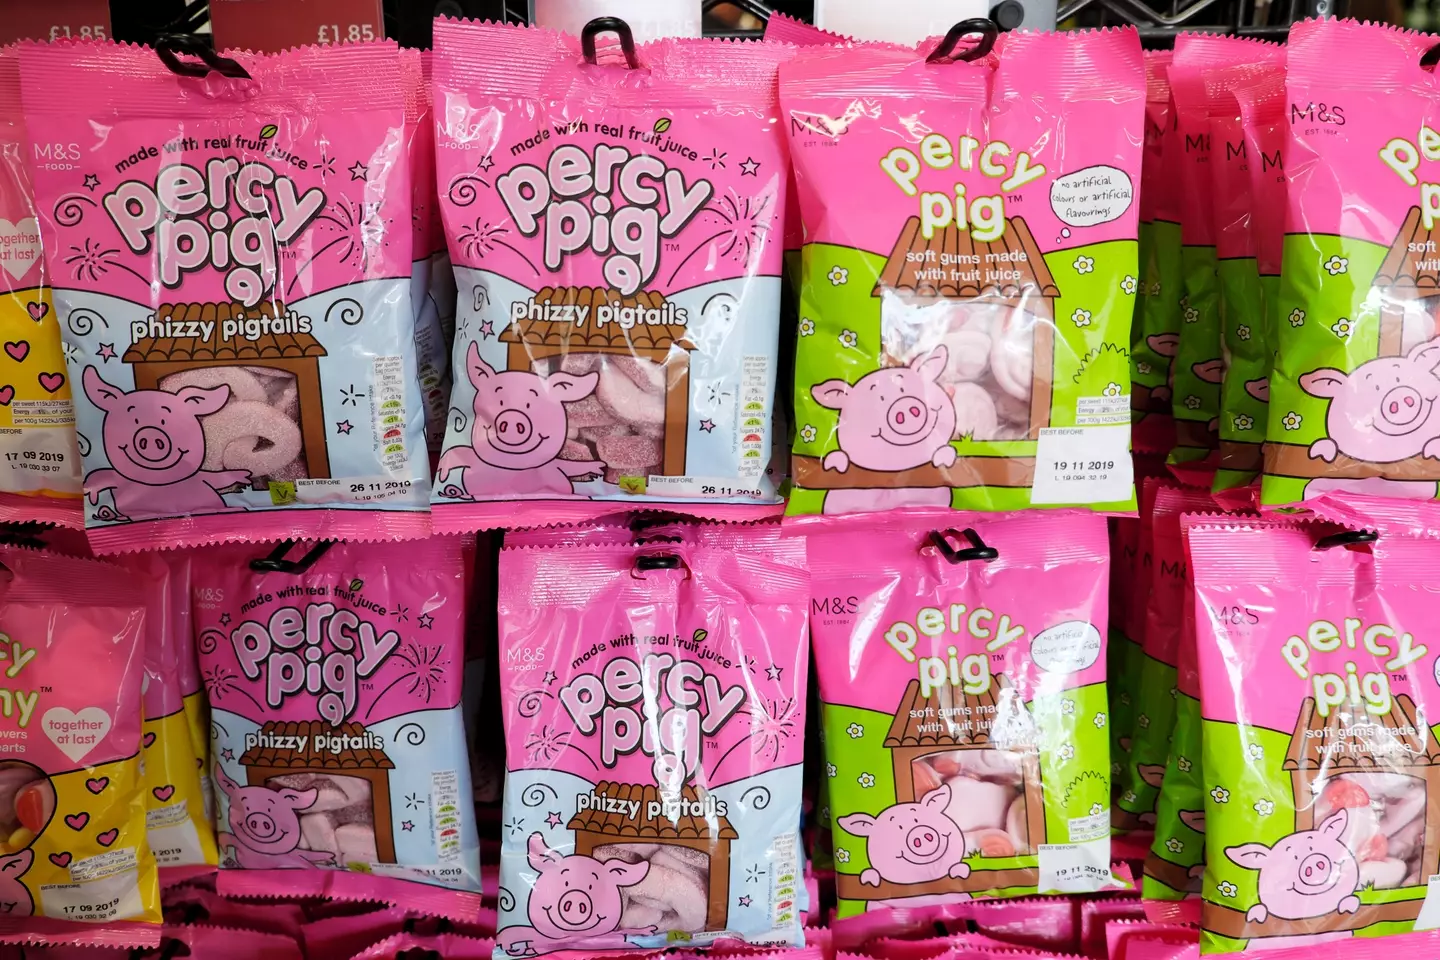 Who doesn't want to try Percy Pigs in slushee form.